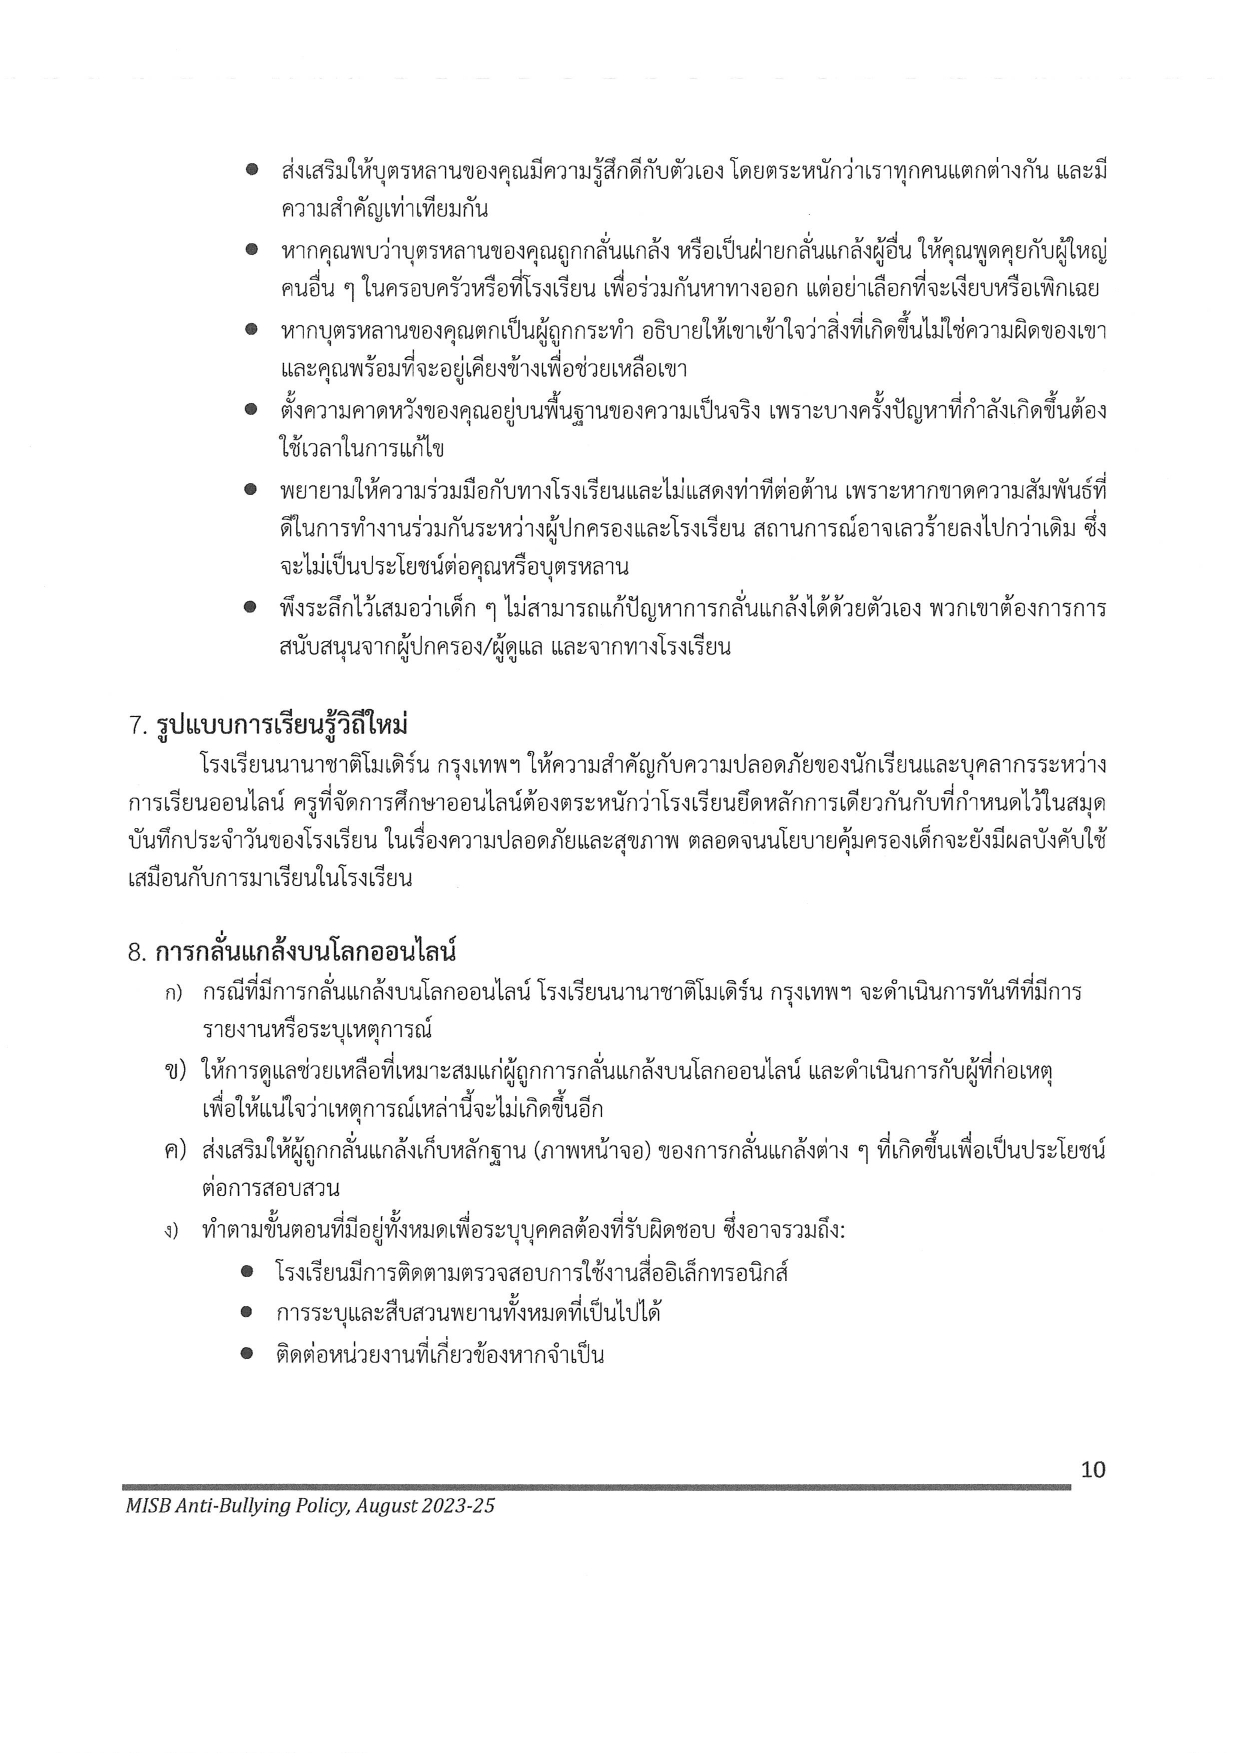 Anti Bullying Policy 2023 2025 Thai page 0012